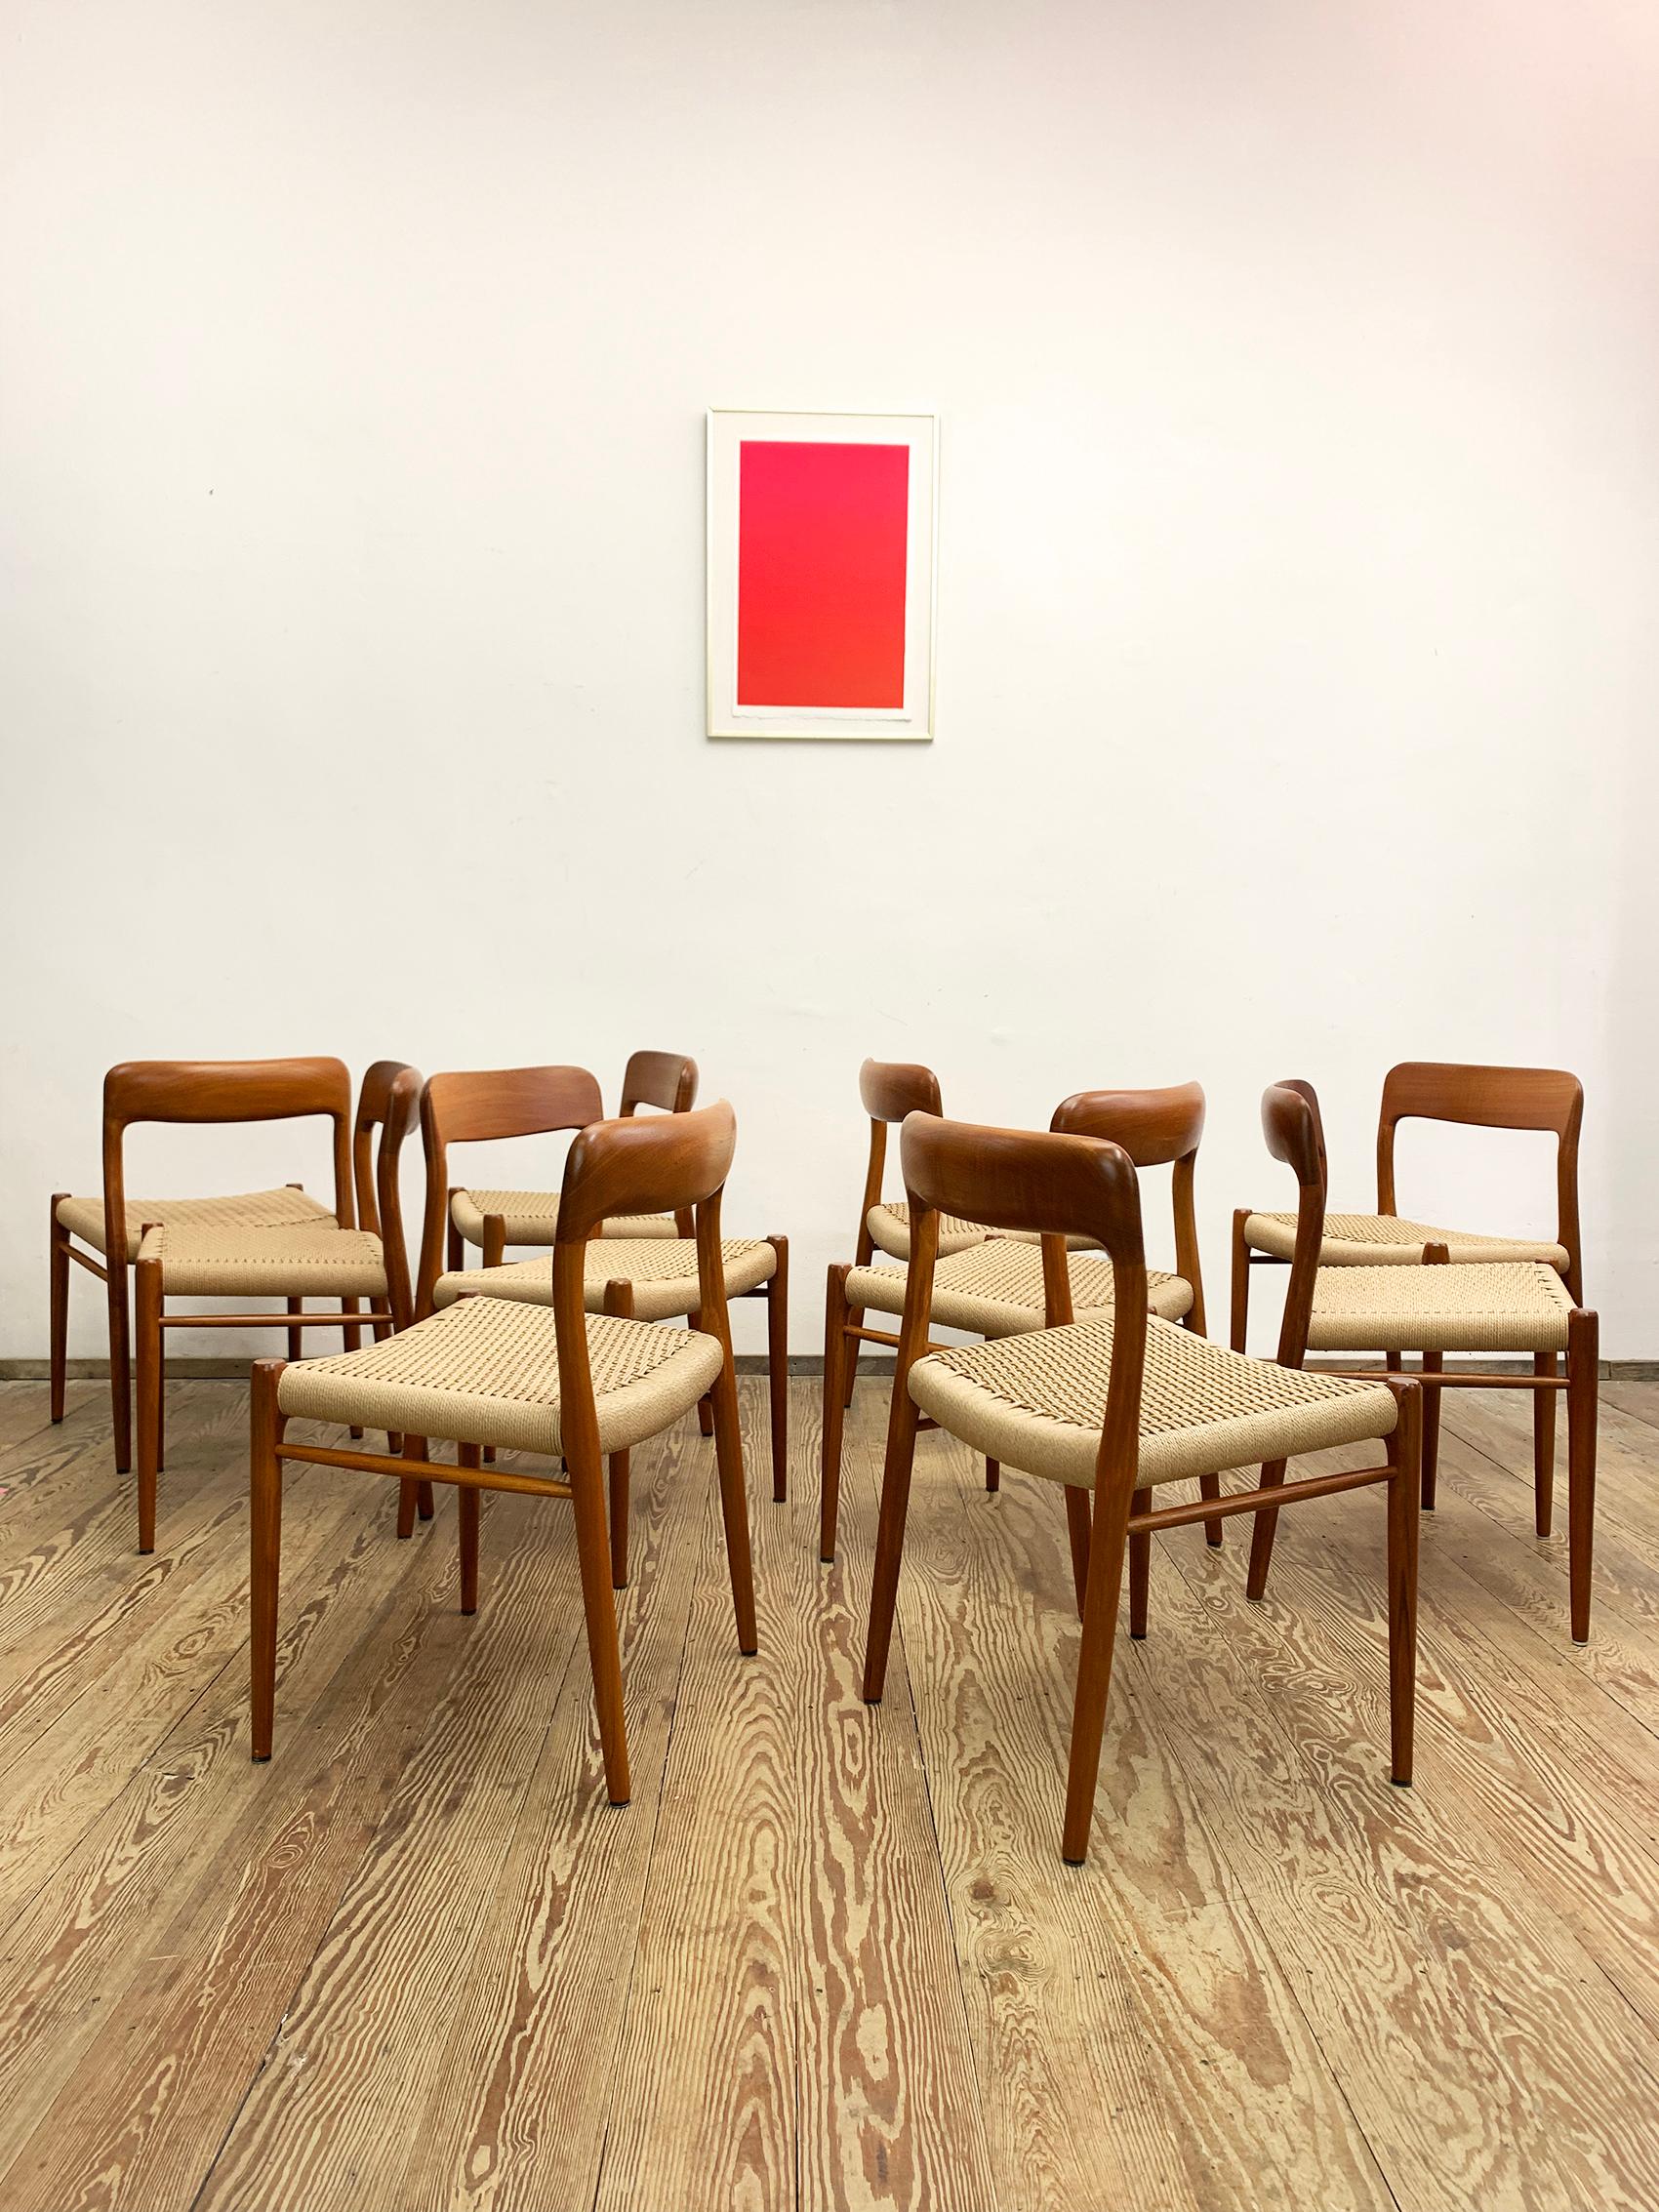 Dimensions: Height: 29.53 in. (75 cm), Width: 19.69 in. (50 cm), Depth: 18.51 in. (47 cm)

This beautiful set of danish dining chairs designed by Niels O. Møller in the 1950s was manufactured by J.L. Møllers in Denmark. The set features 10 chairs of